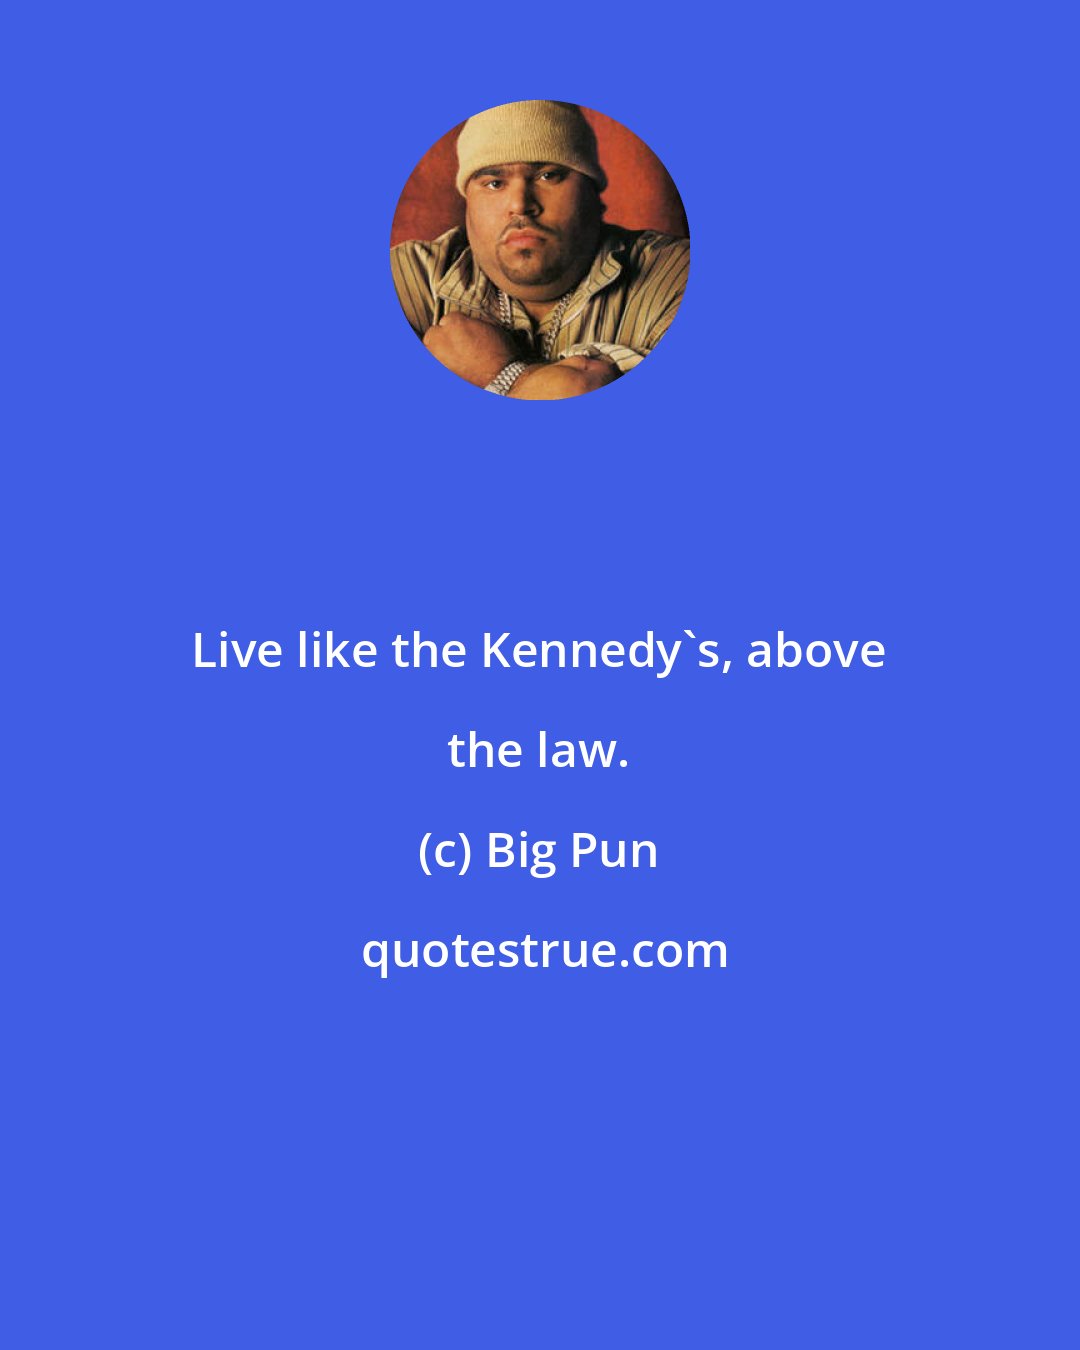 Big Pun: Live like the Kennedy's, above the law.